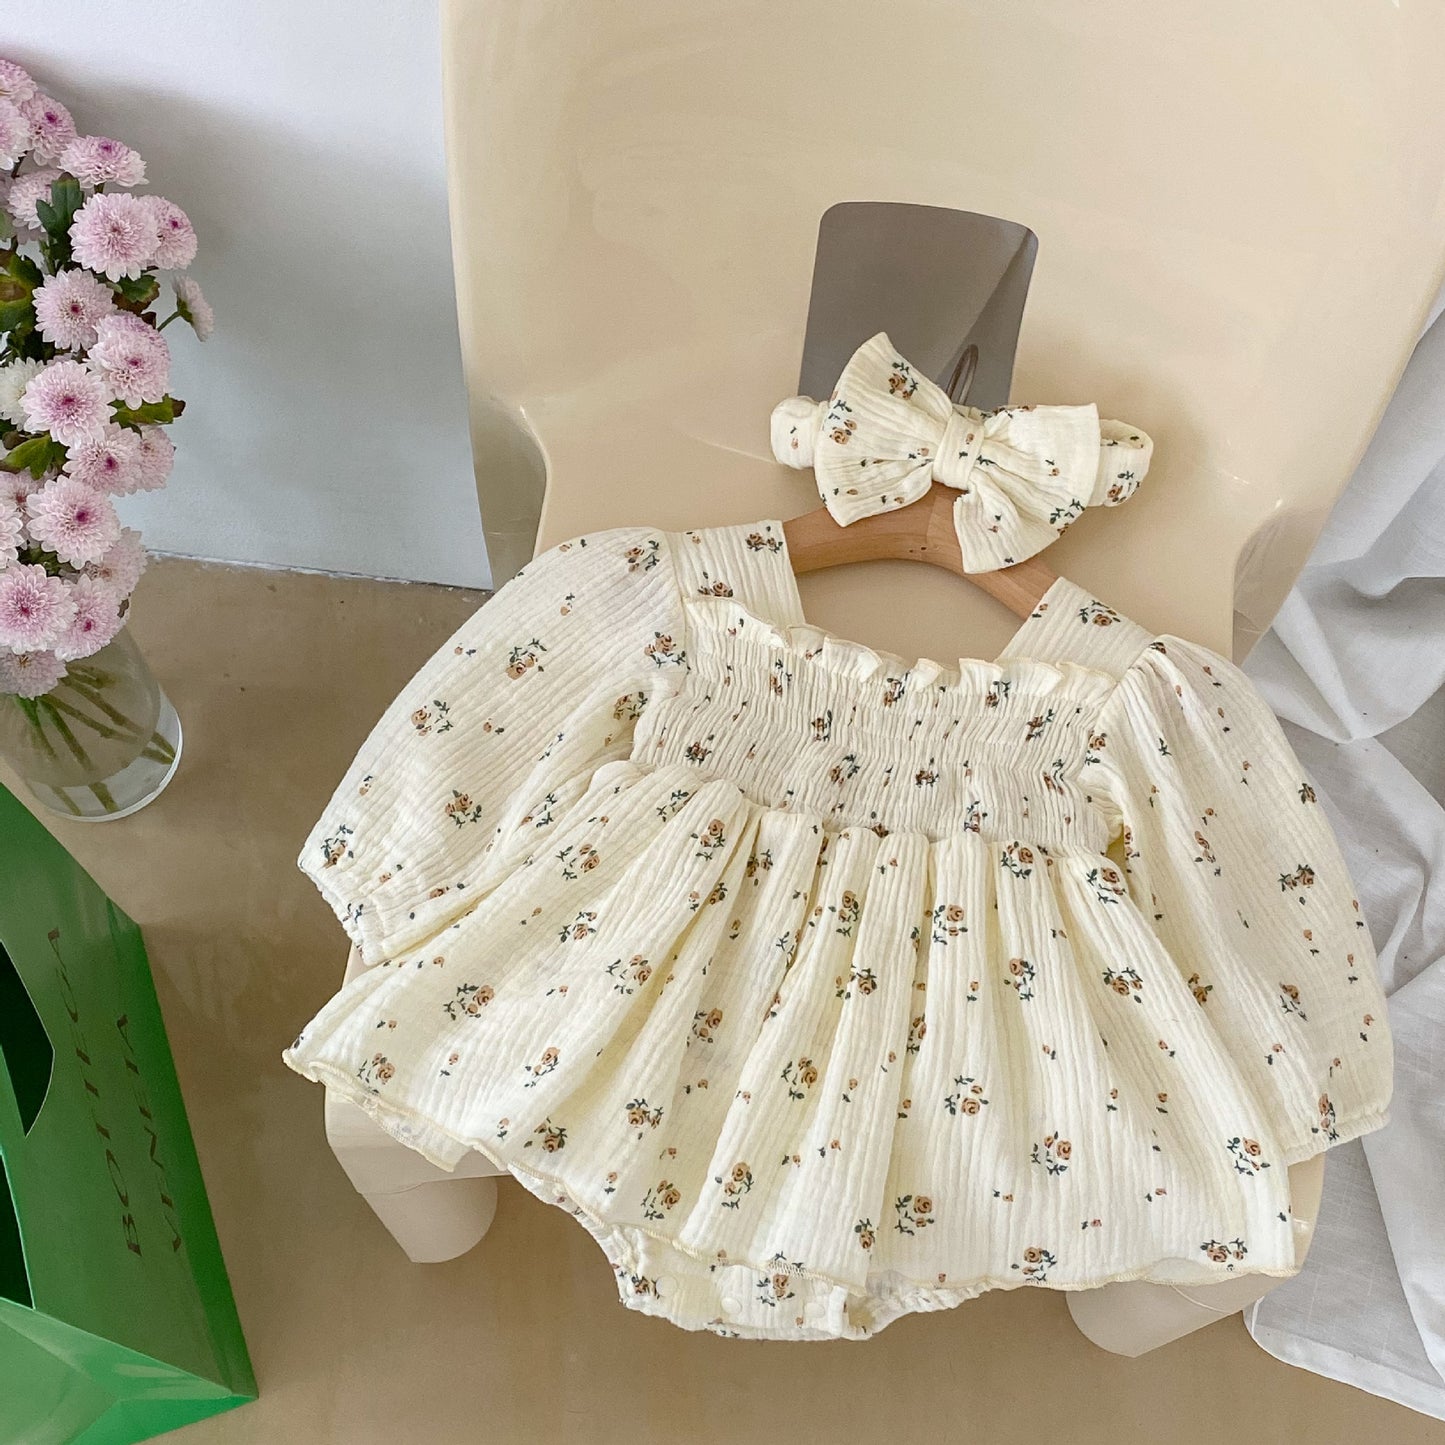 Double-Layered Mesh Floral Onesie: Princess-Inspired Crawling Dress For Baby Girls